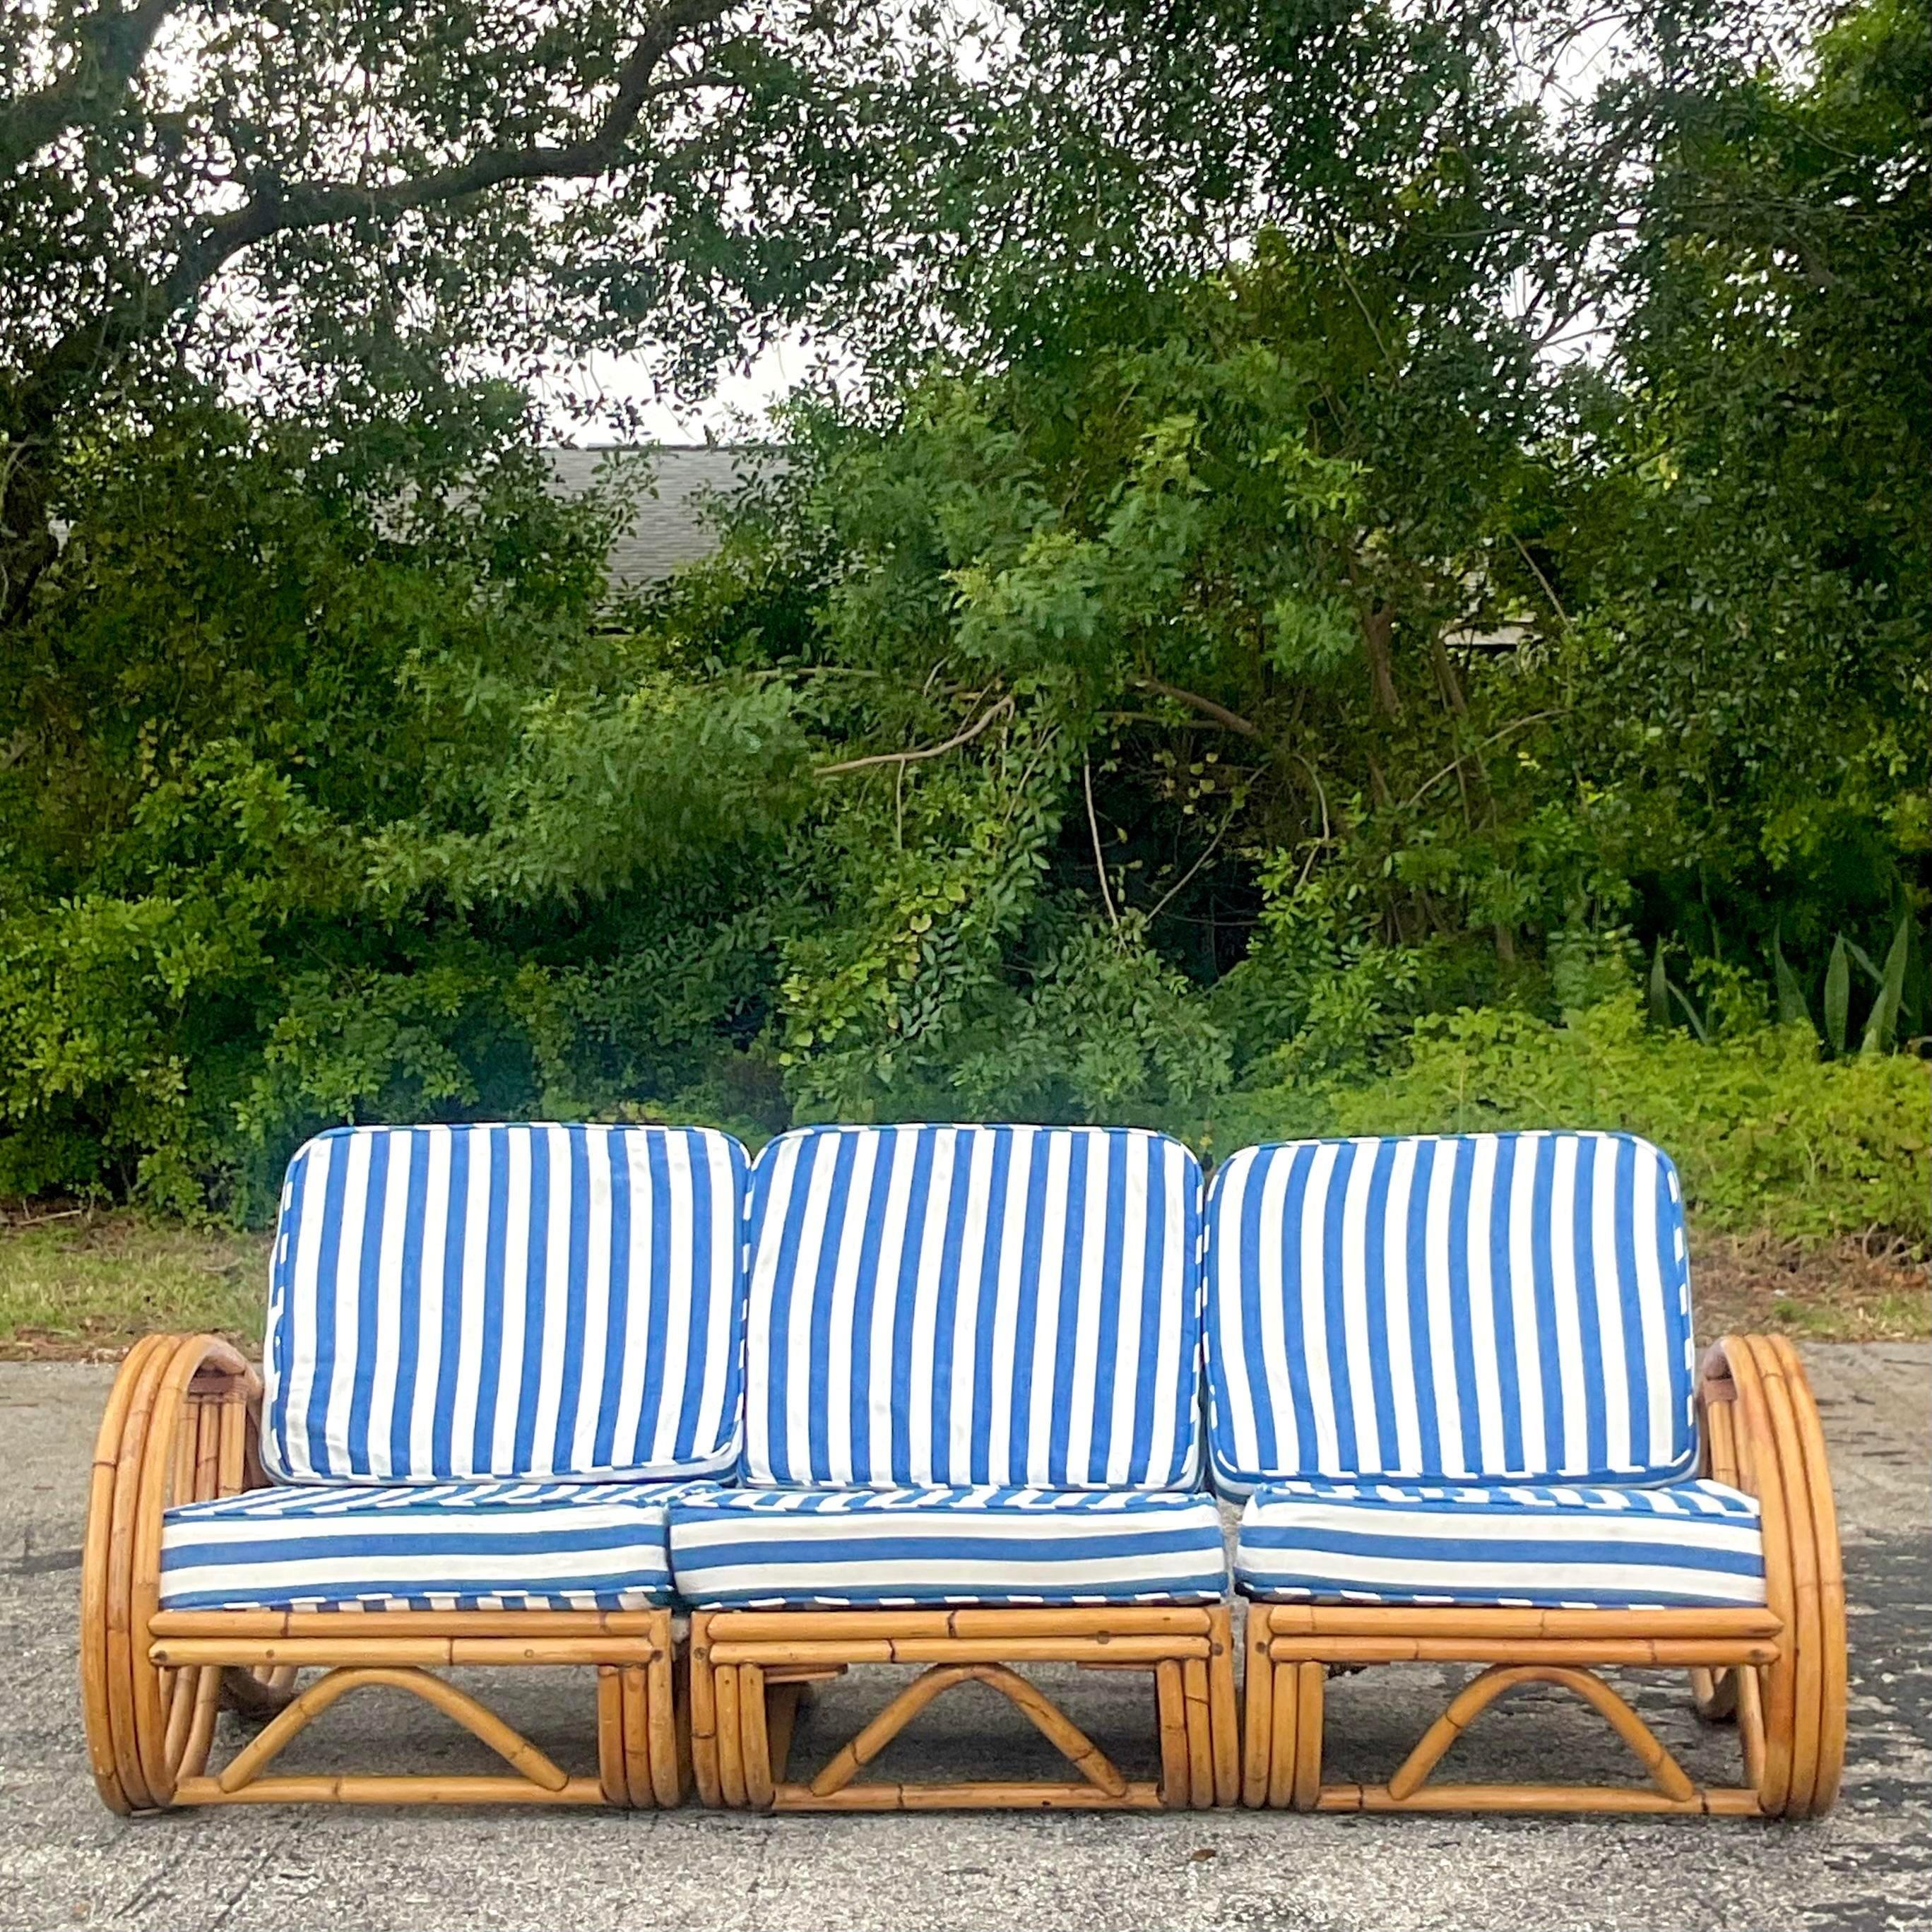 Upholstery Vintage Coastal Bent Rattan Sofa With Cabana Striped Cushions For Sale